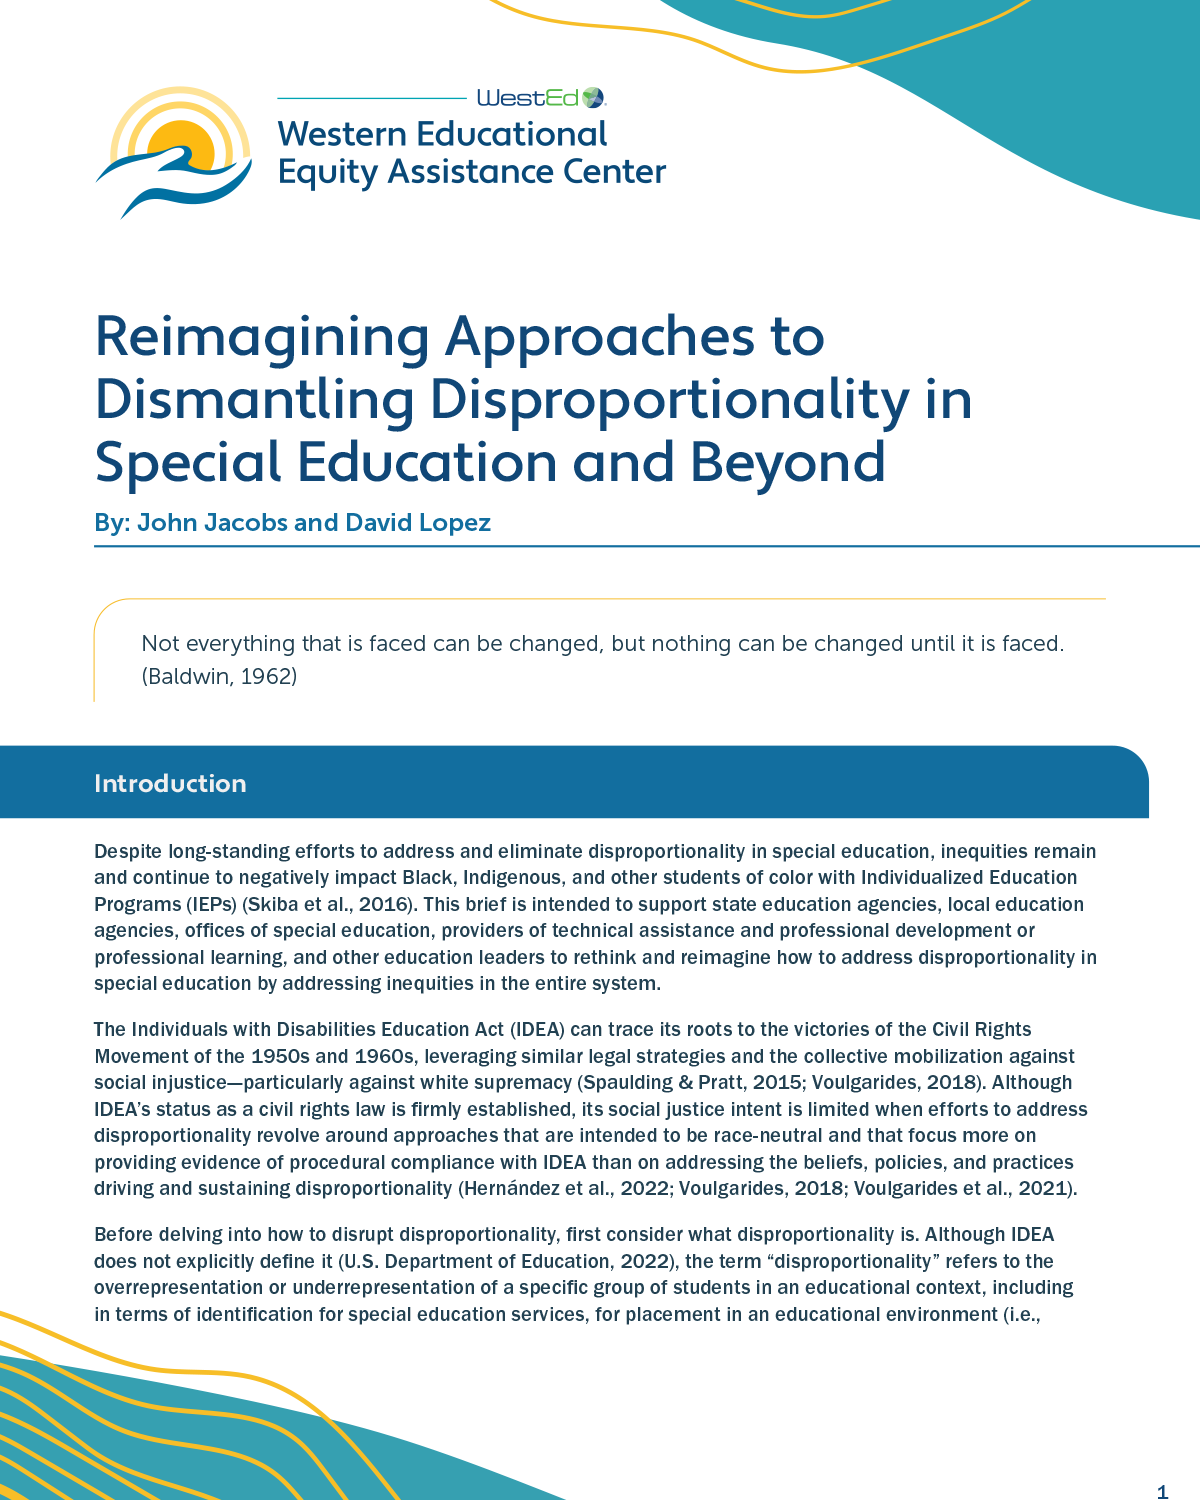 Reimagining Approaches to Dismantling Disproportionality in Special Education and Beyond